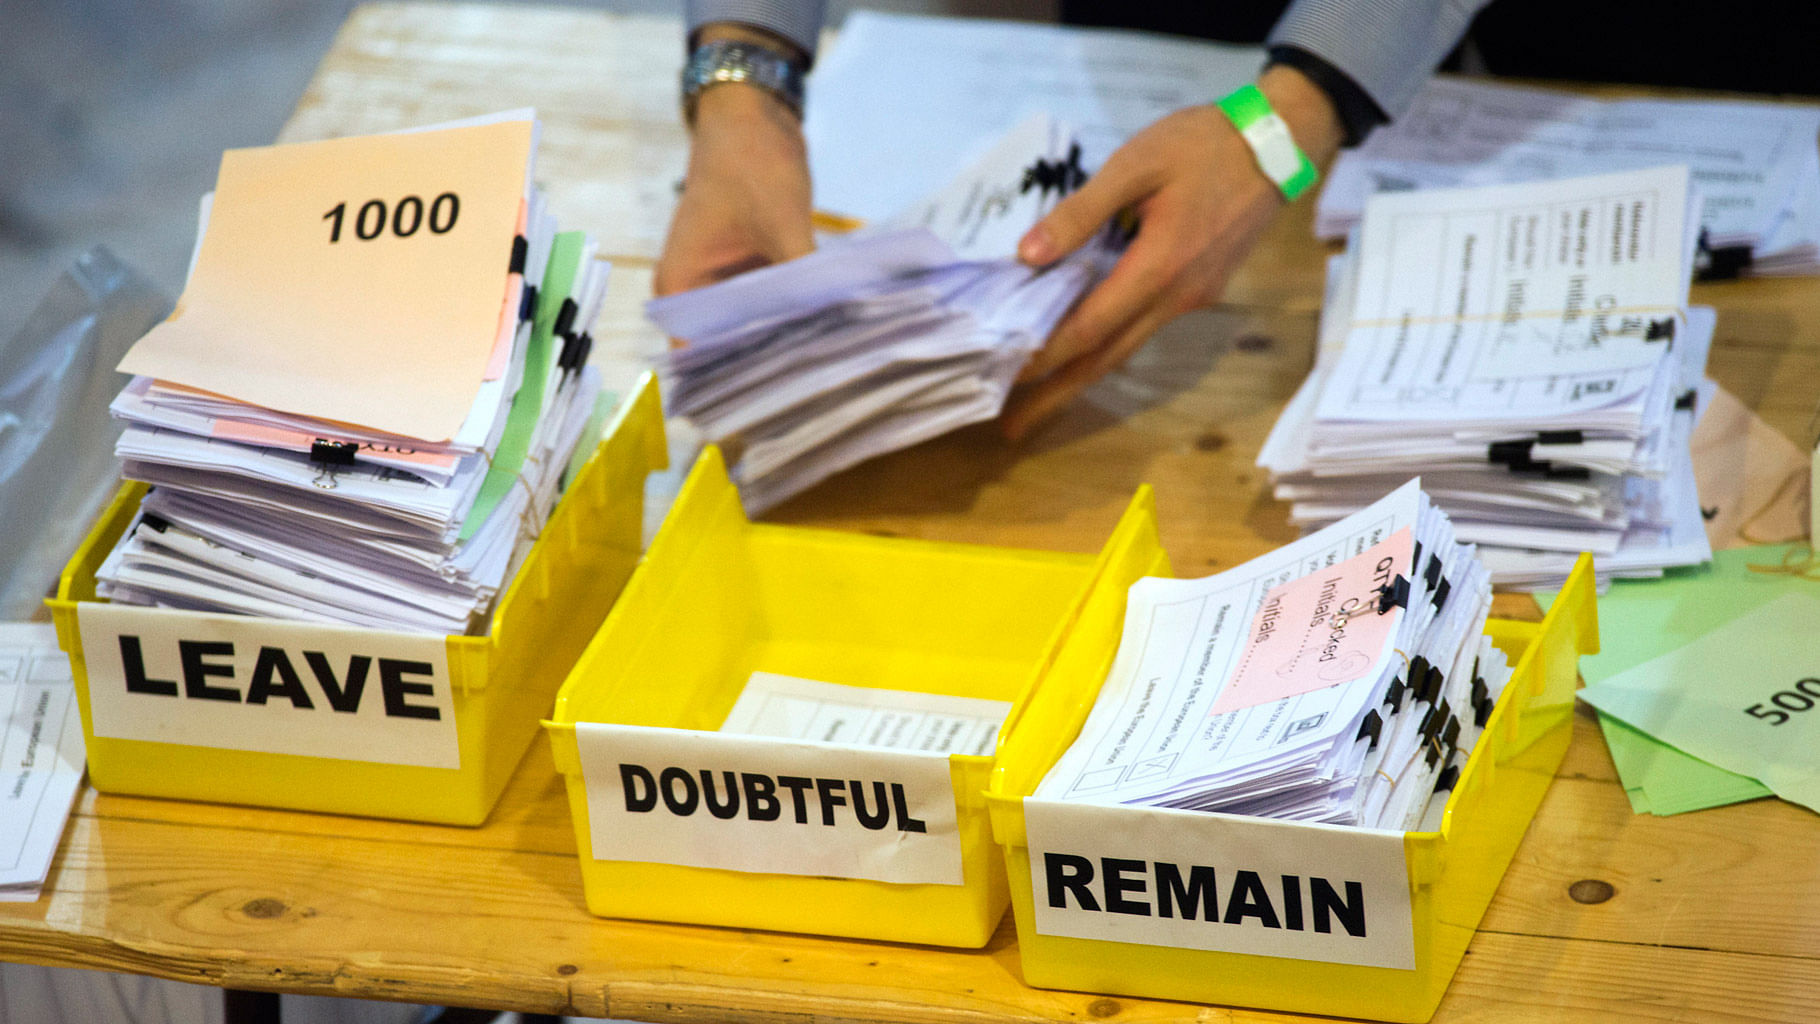 

Votes are sorted into remain, leave and doubtful trays as ballots are counted during the EU Referendum count  at the Lindley Hall in London, 24 June  2016. (Photo: AP)